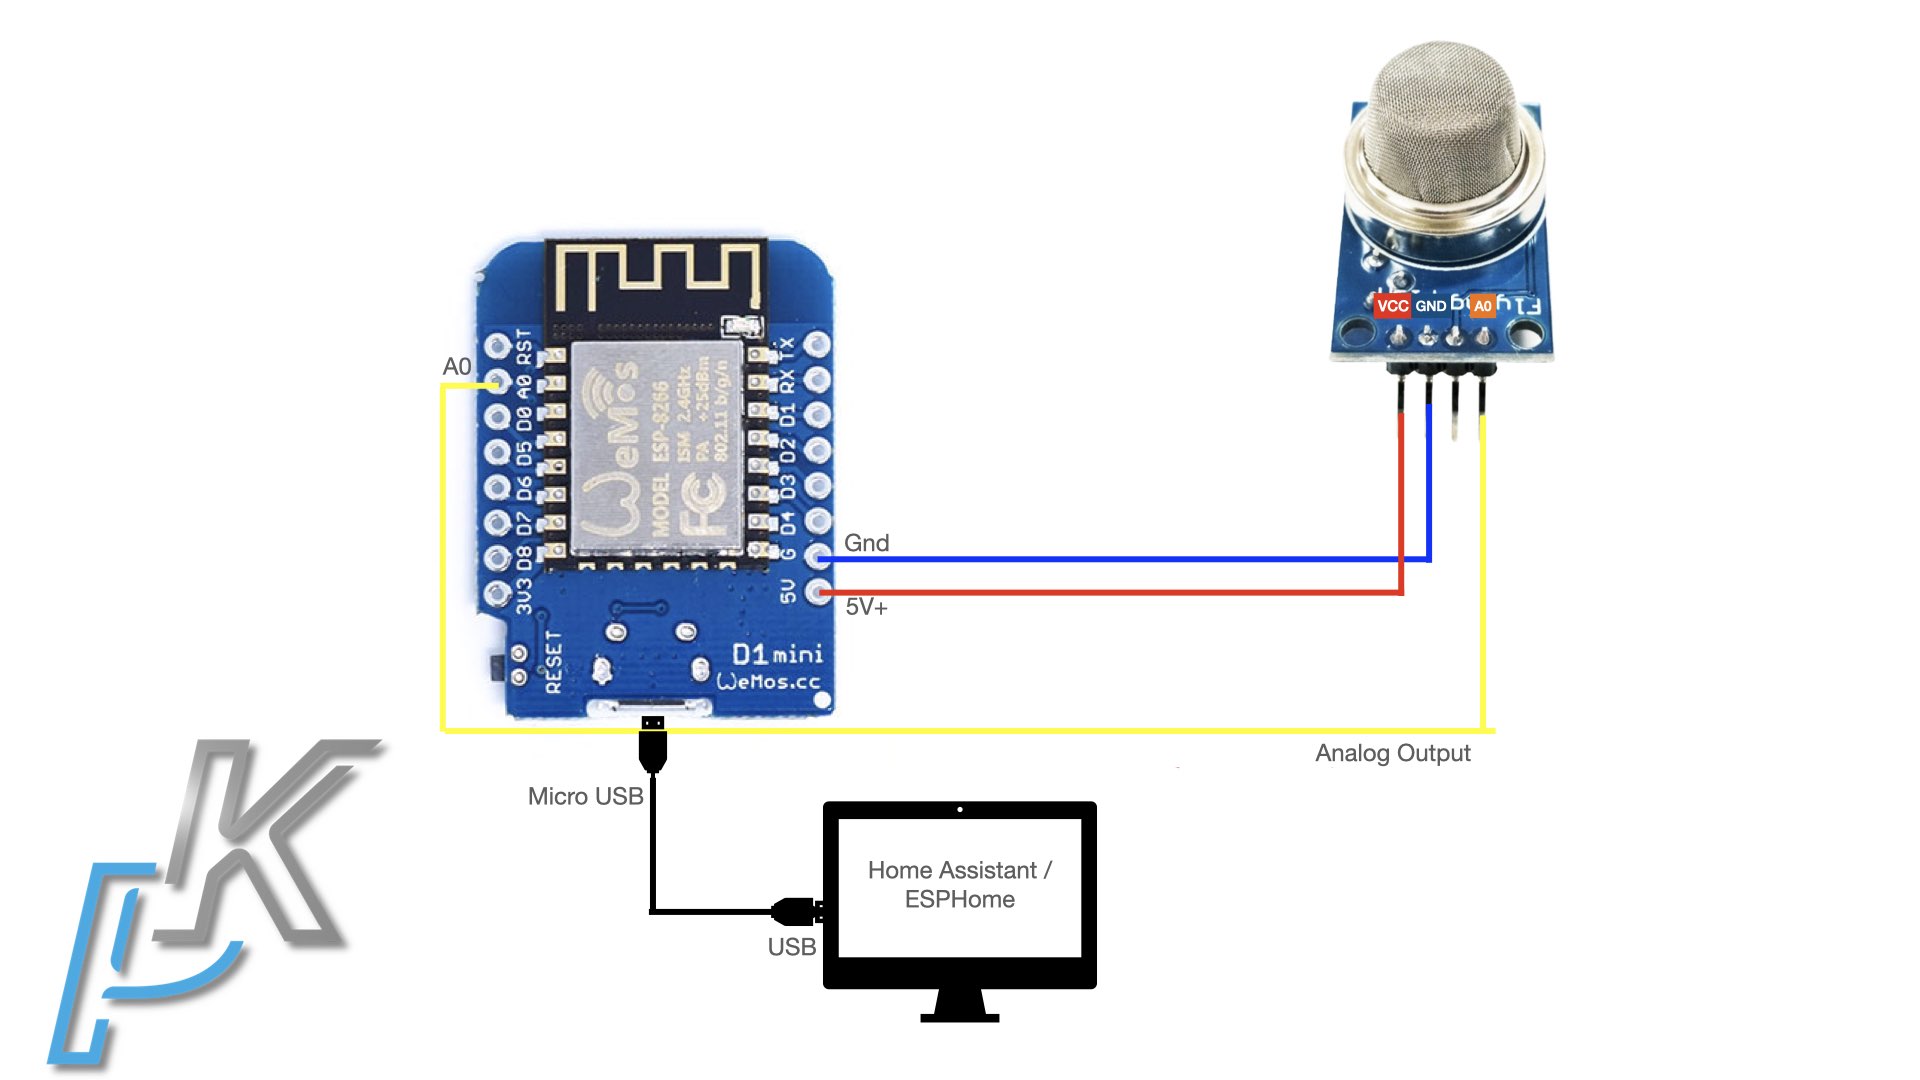 Connect the future DIY Smoke Sensor for Home Assistant to the device where Home Assistant is running.